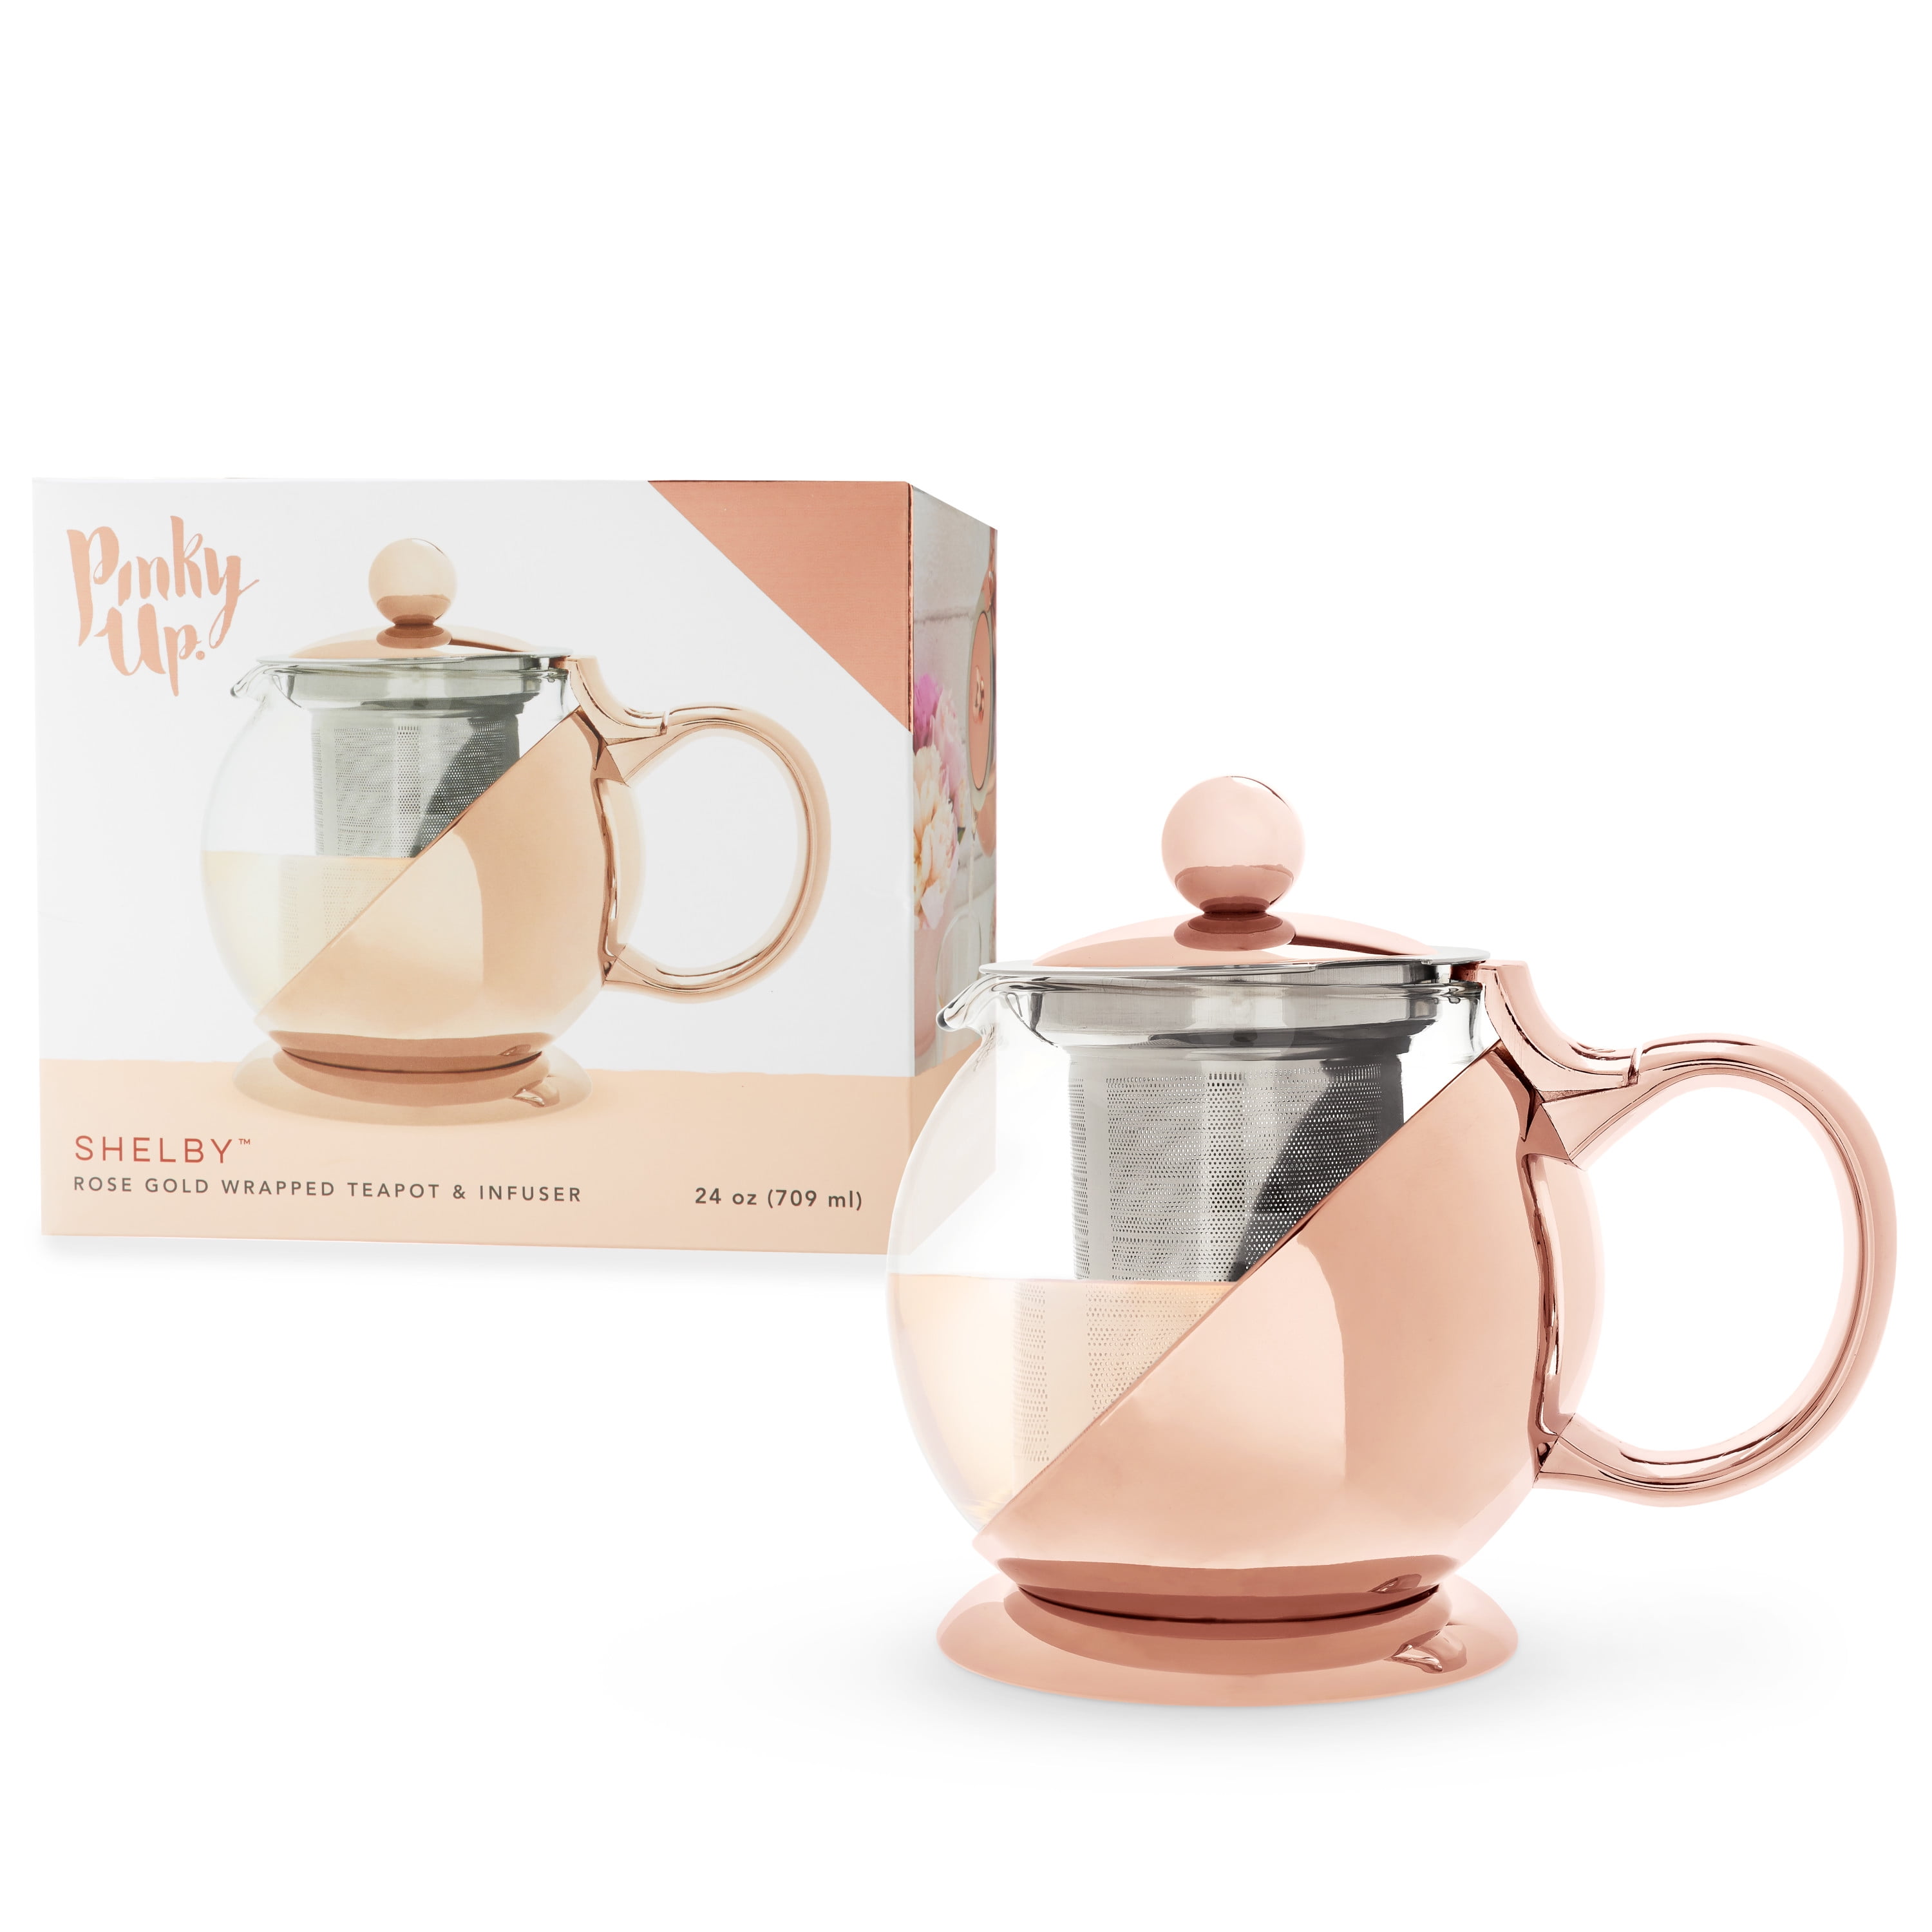 Teapot with Infuser for Loose Tea - 33oz, 4 Cup Tea Infuser, Clear Gla – Ur  Happy Places